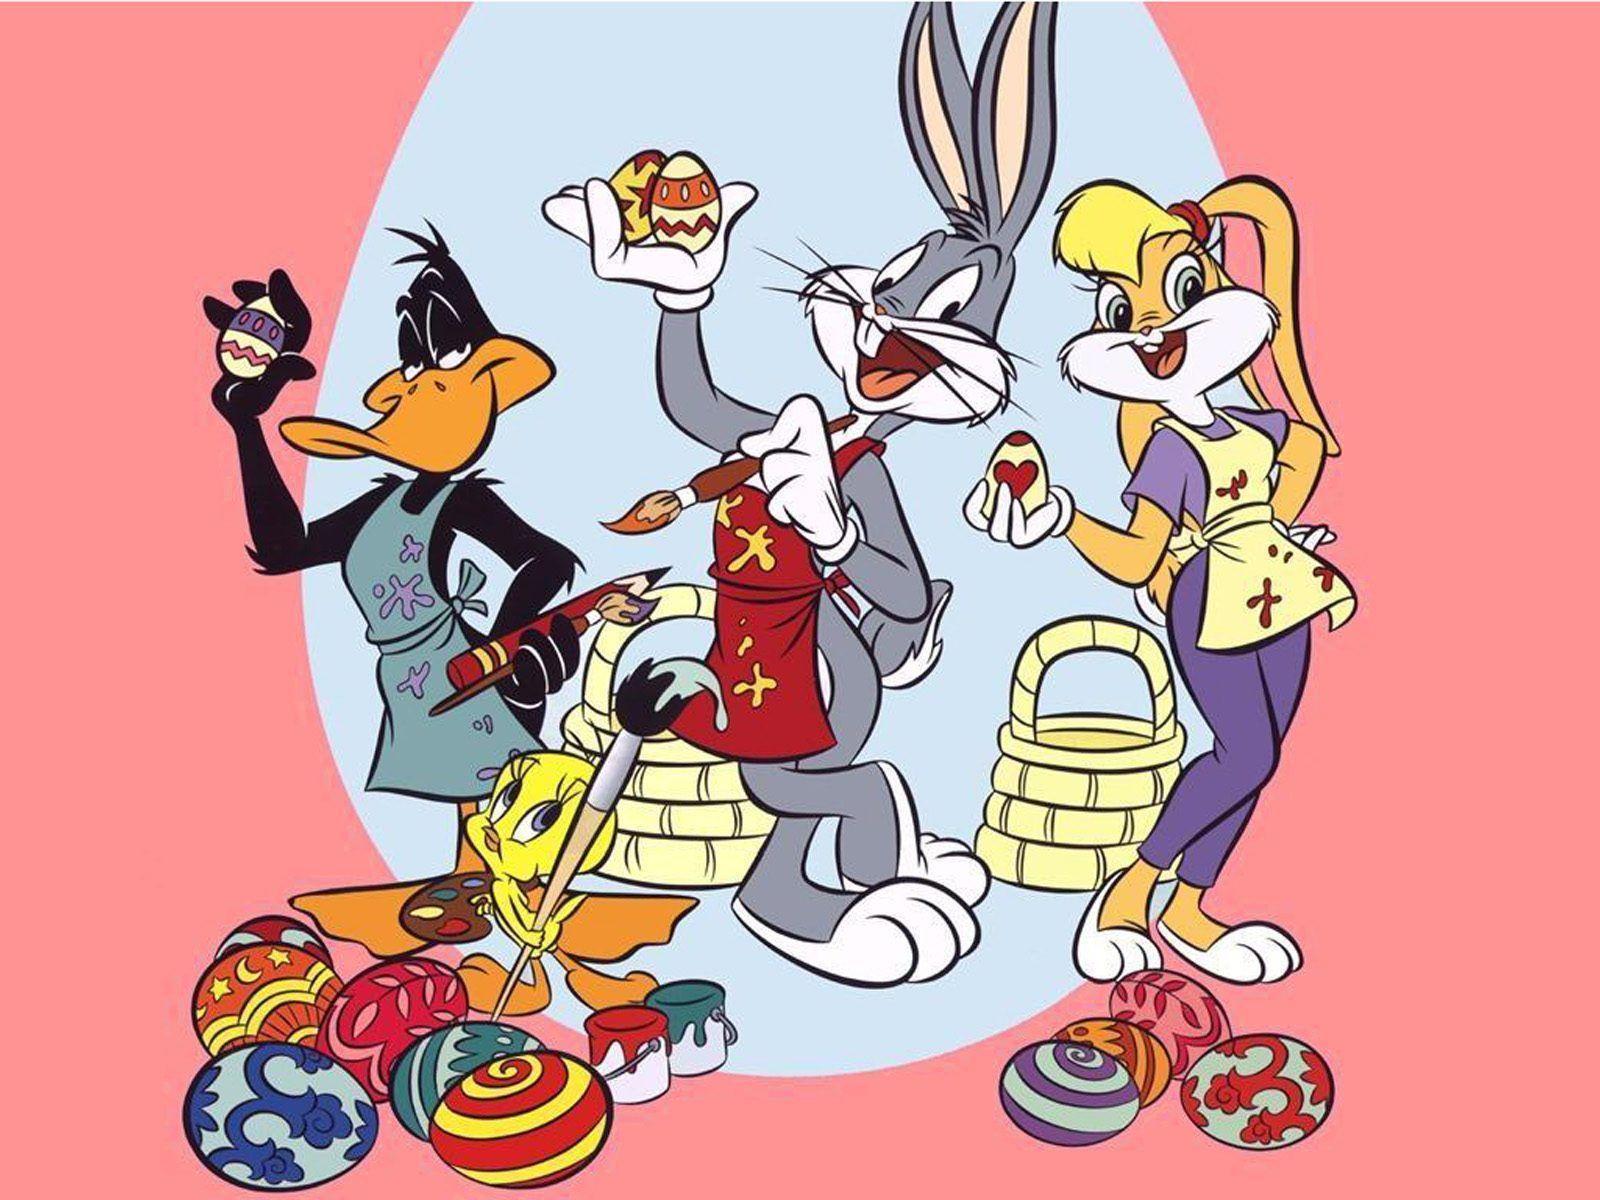 Coloring Easter Eggs Bugs Bunny And Lola Bunny Cartoon Looney